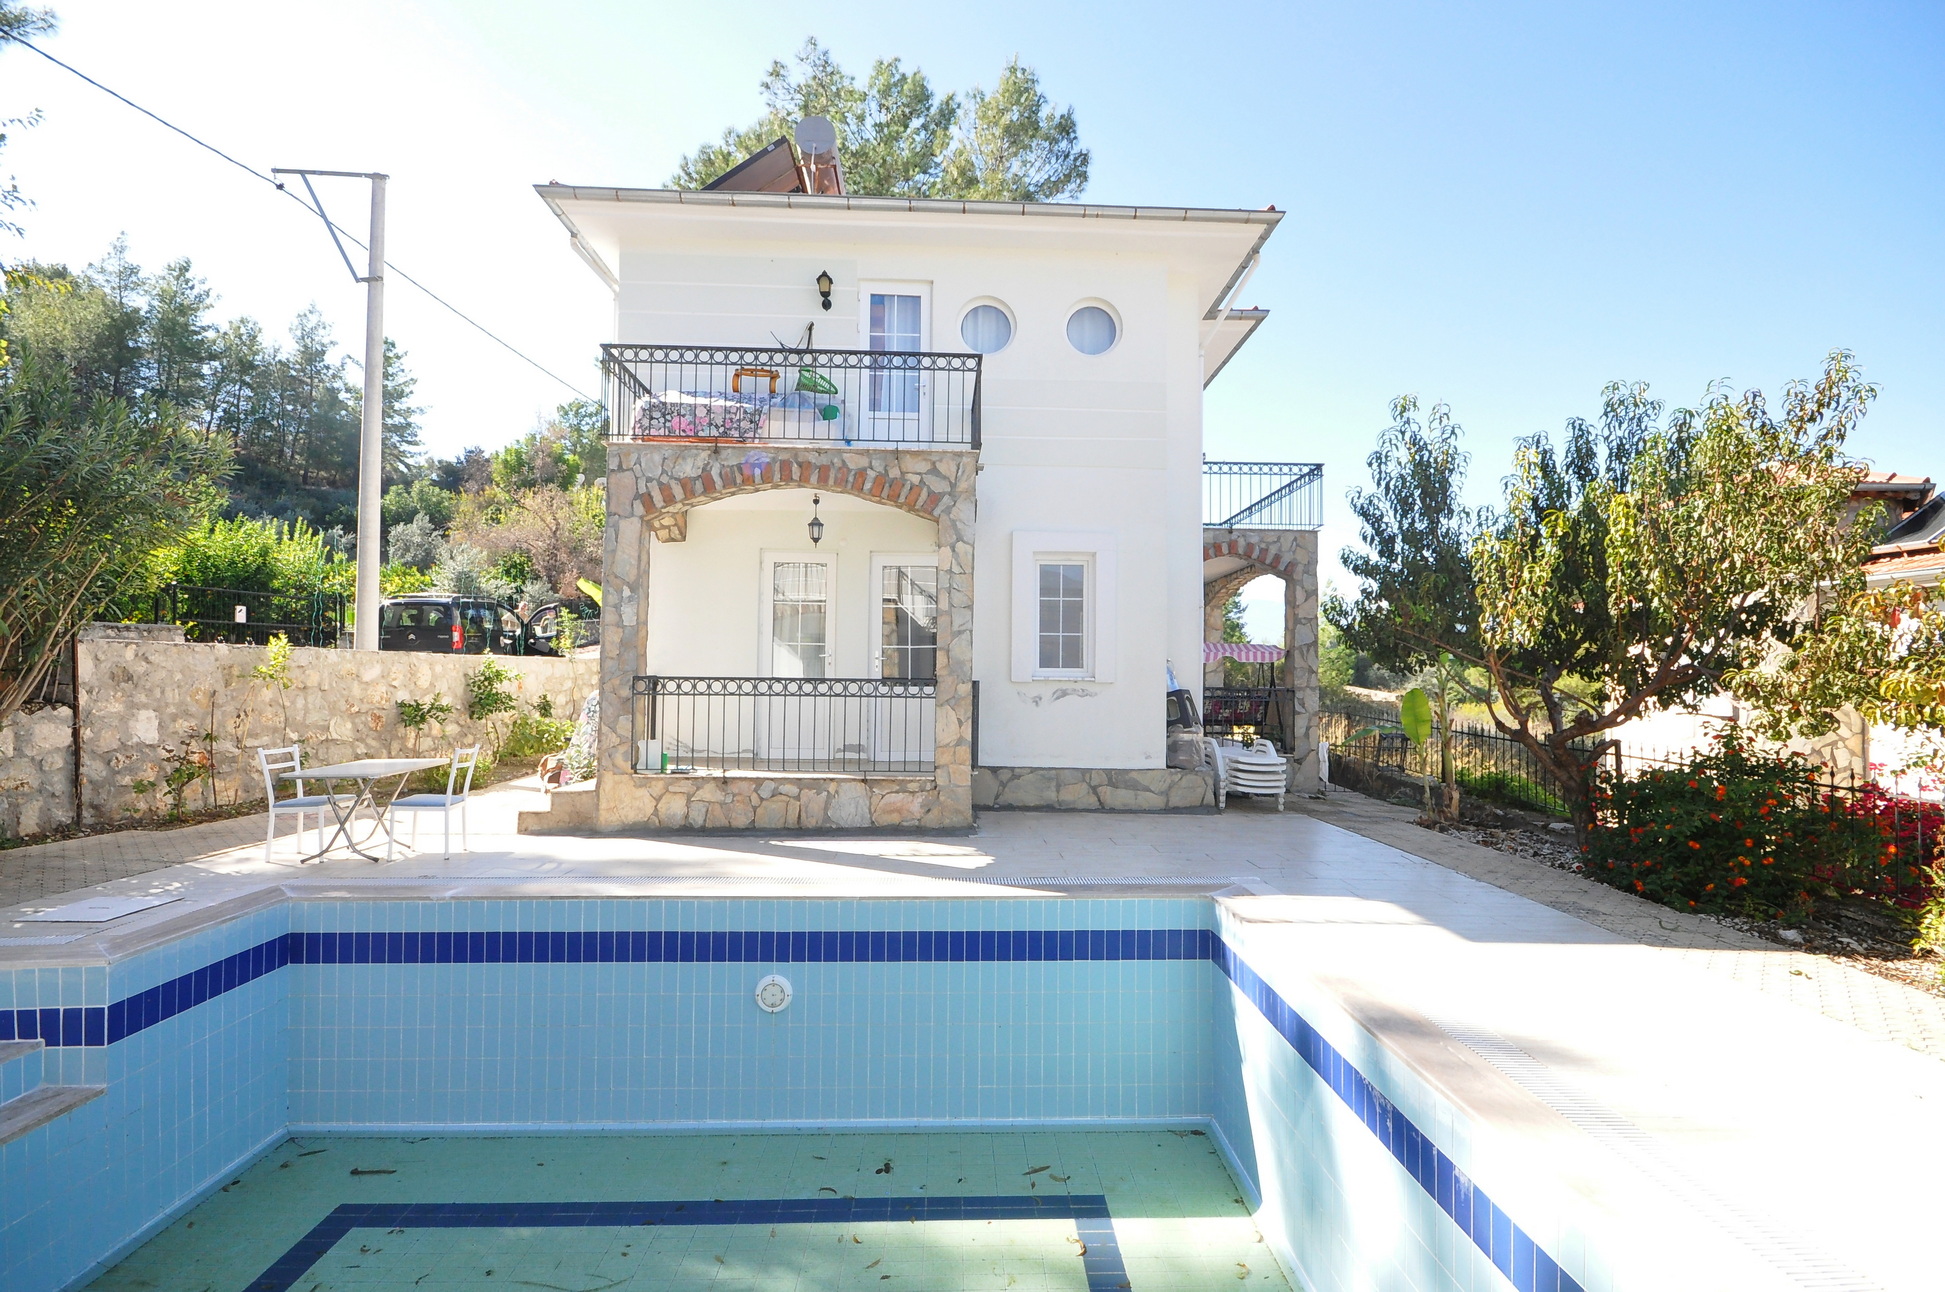 Countryside Rural 3 Bedroom Detached Villa with Shared Swimming Pool